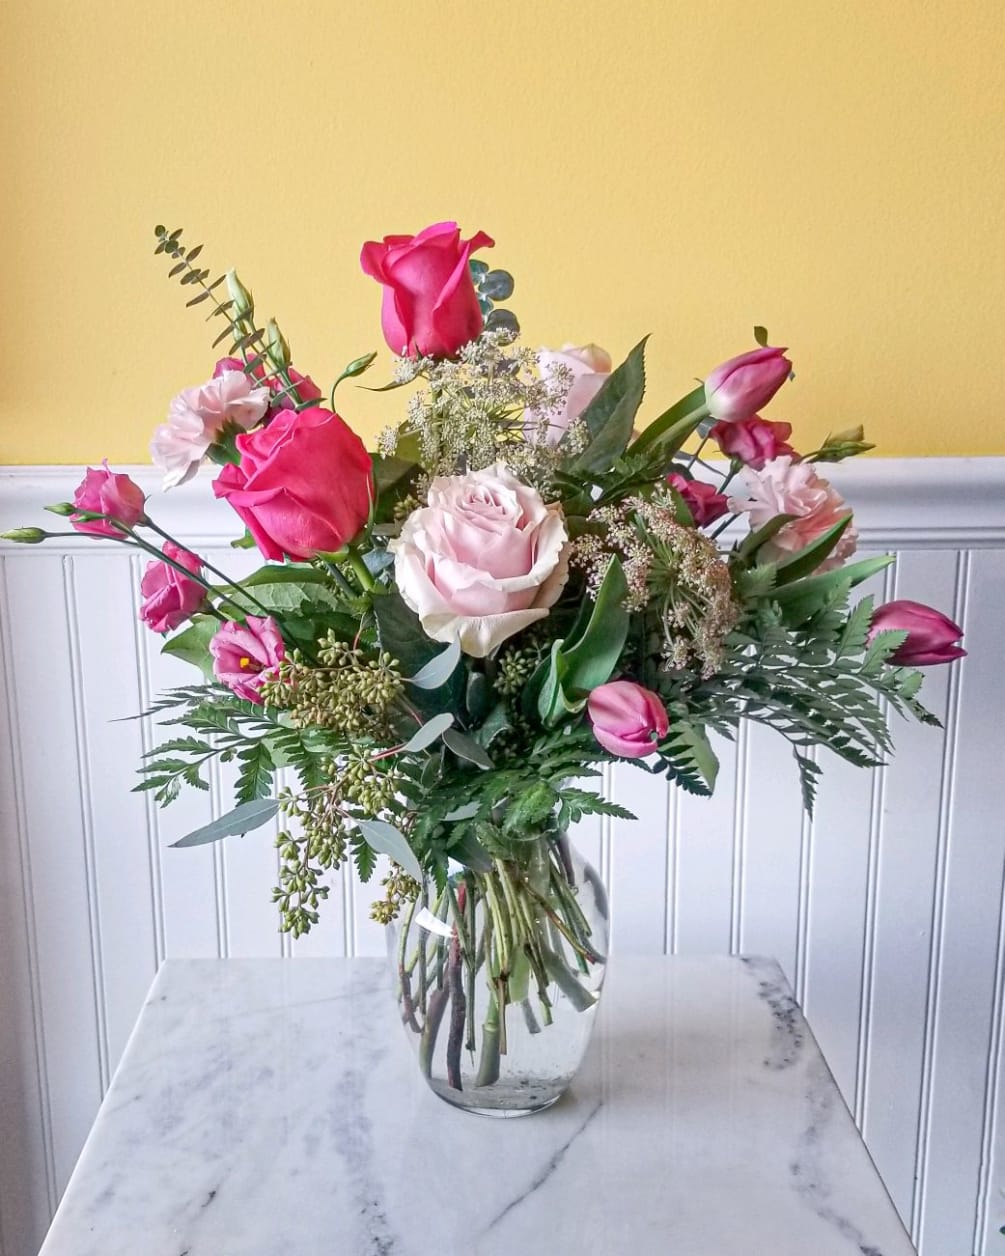 A Designers Choice of various shades of Pink flowers. Using the freshest